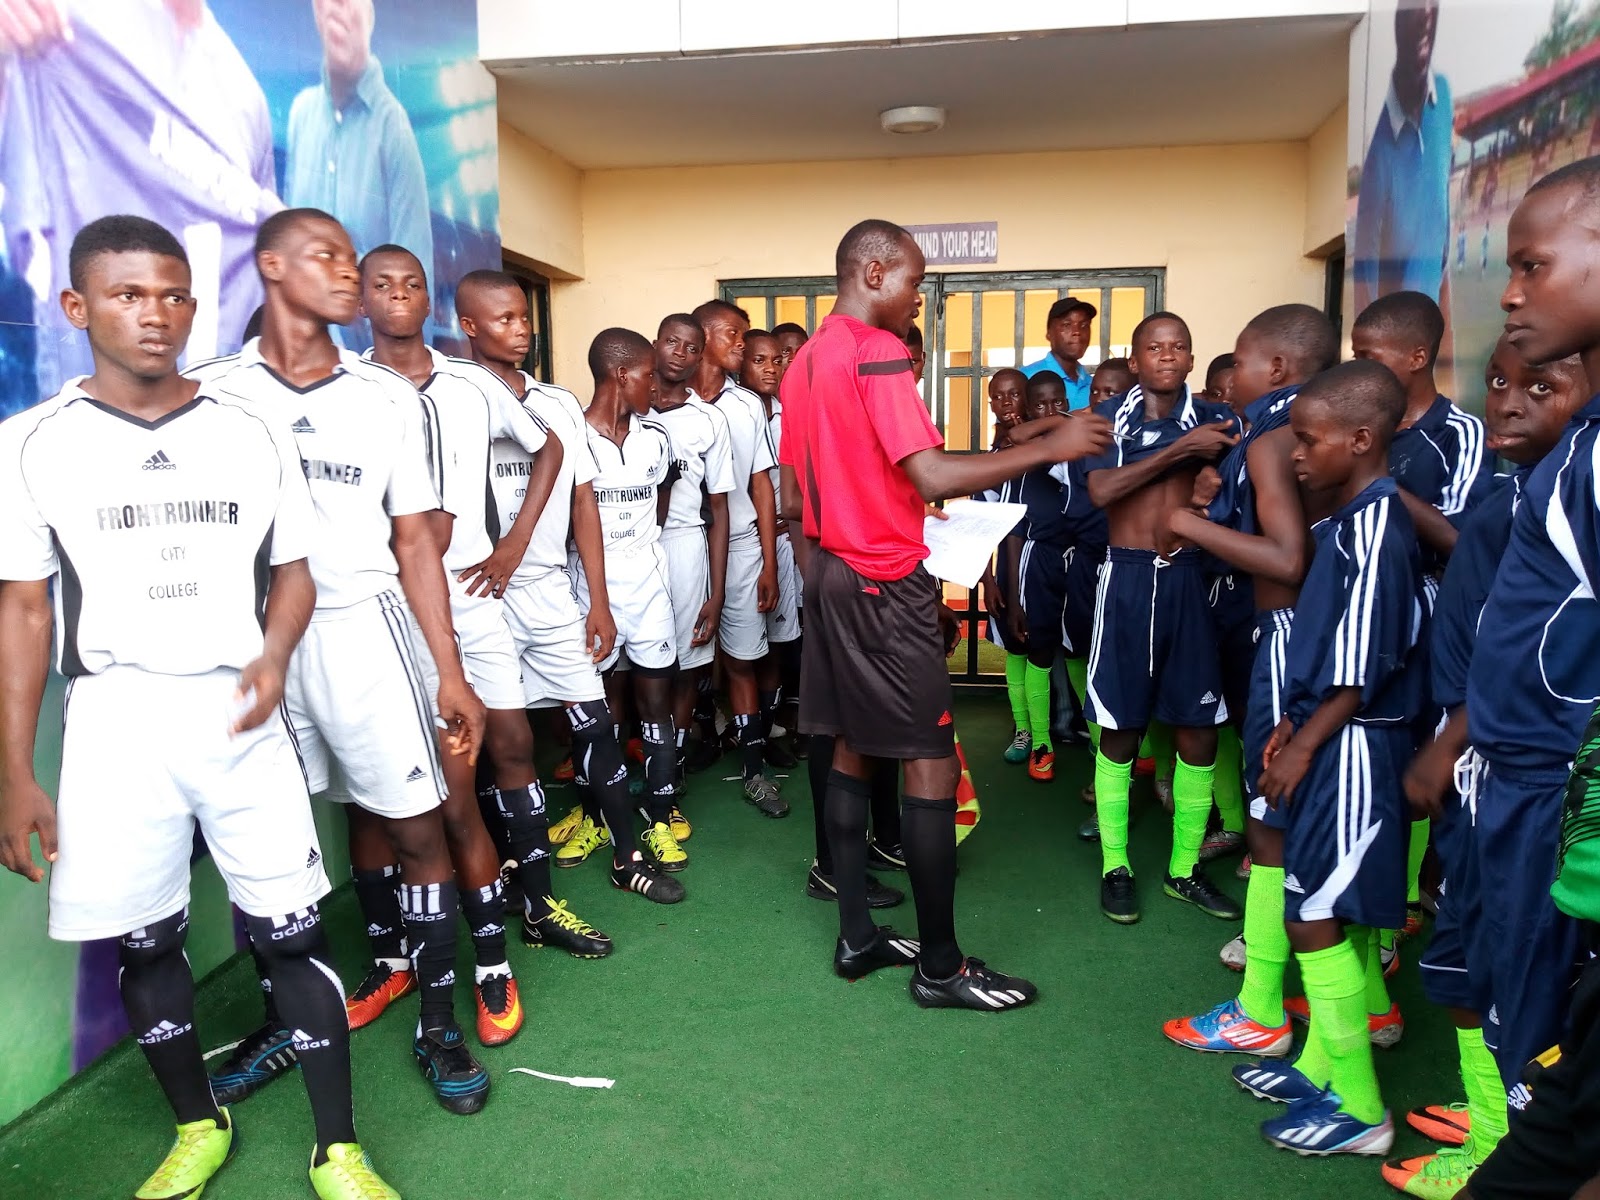 My thought on Private School Games (PSG) 2018 held in Lagos